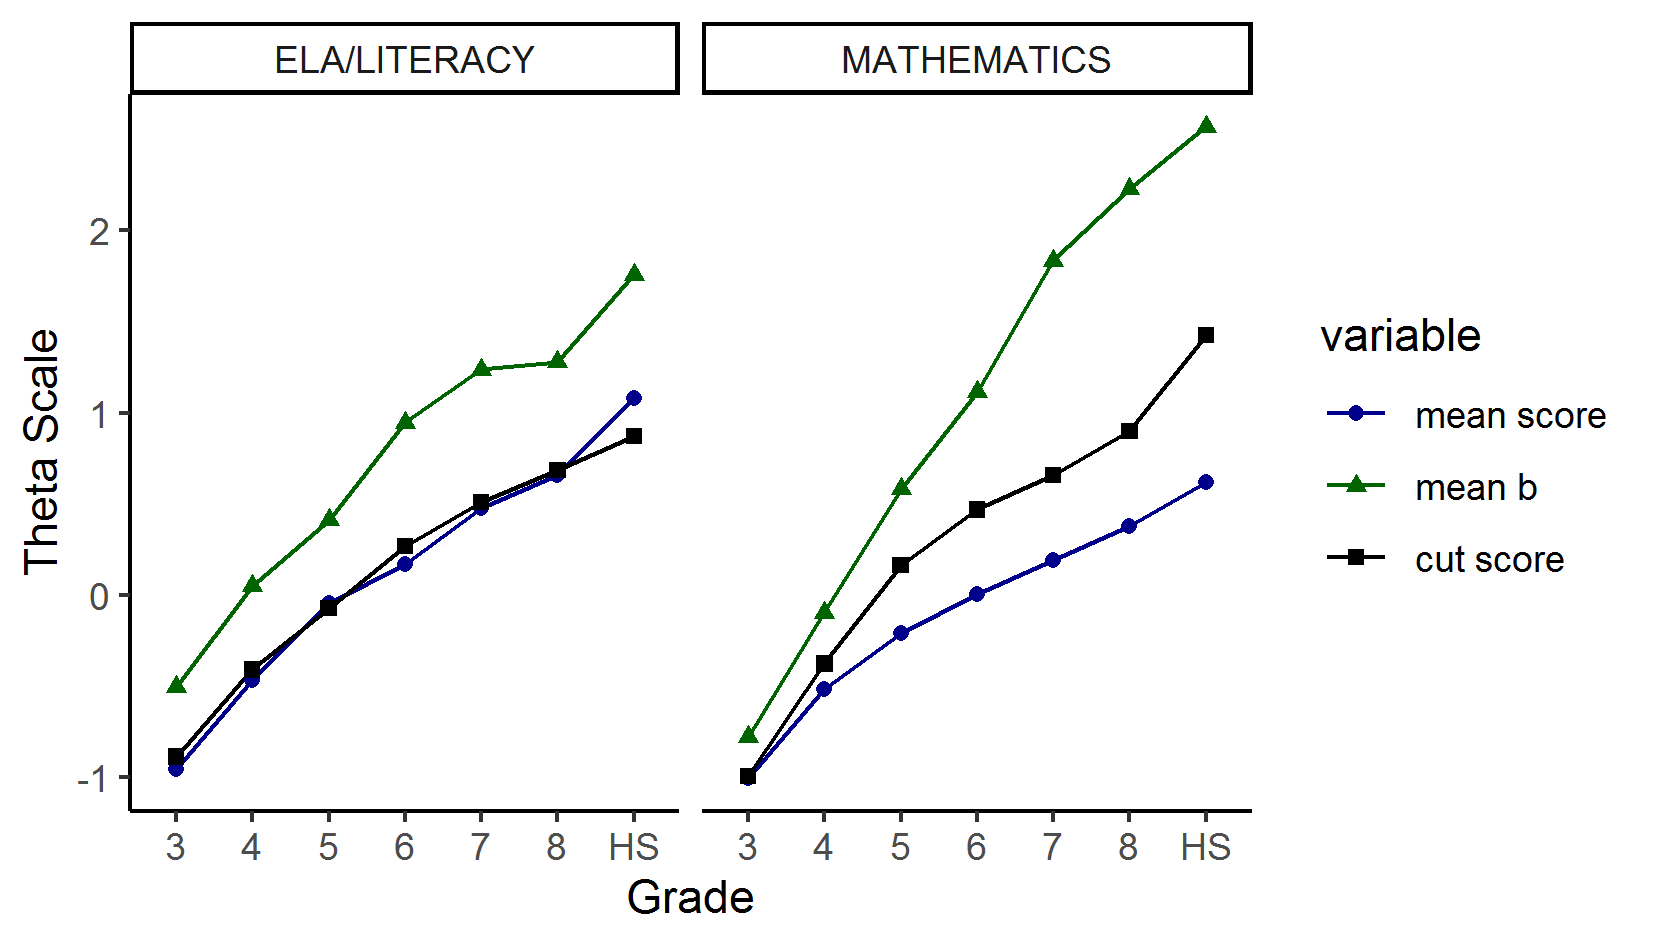 Comparison of Item Difficulty, Mean, Student Scores, Cut Scores for ELA/Literacy and Mathematics